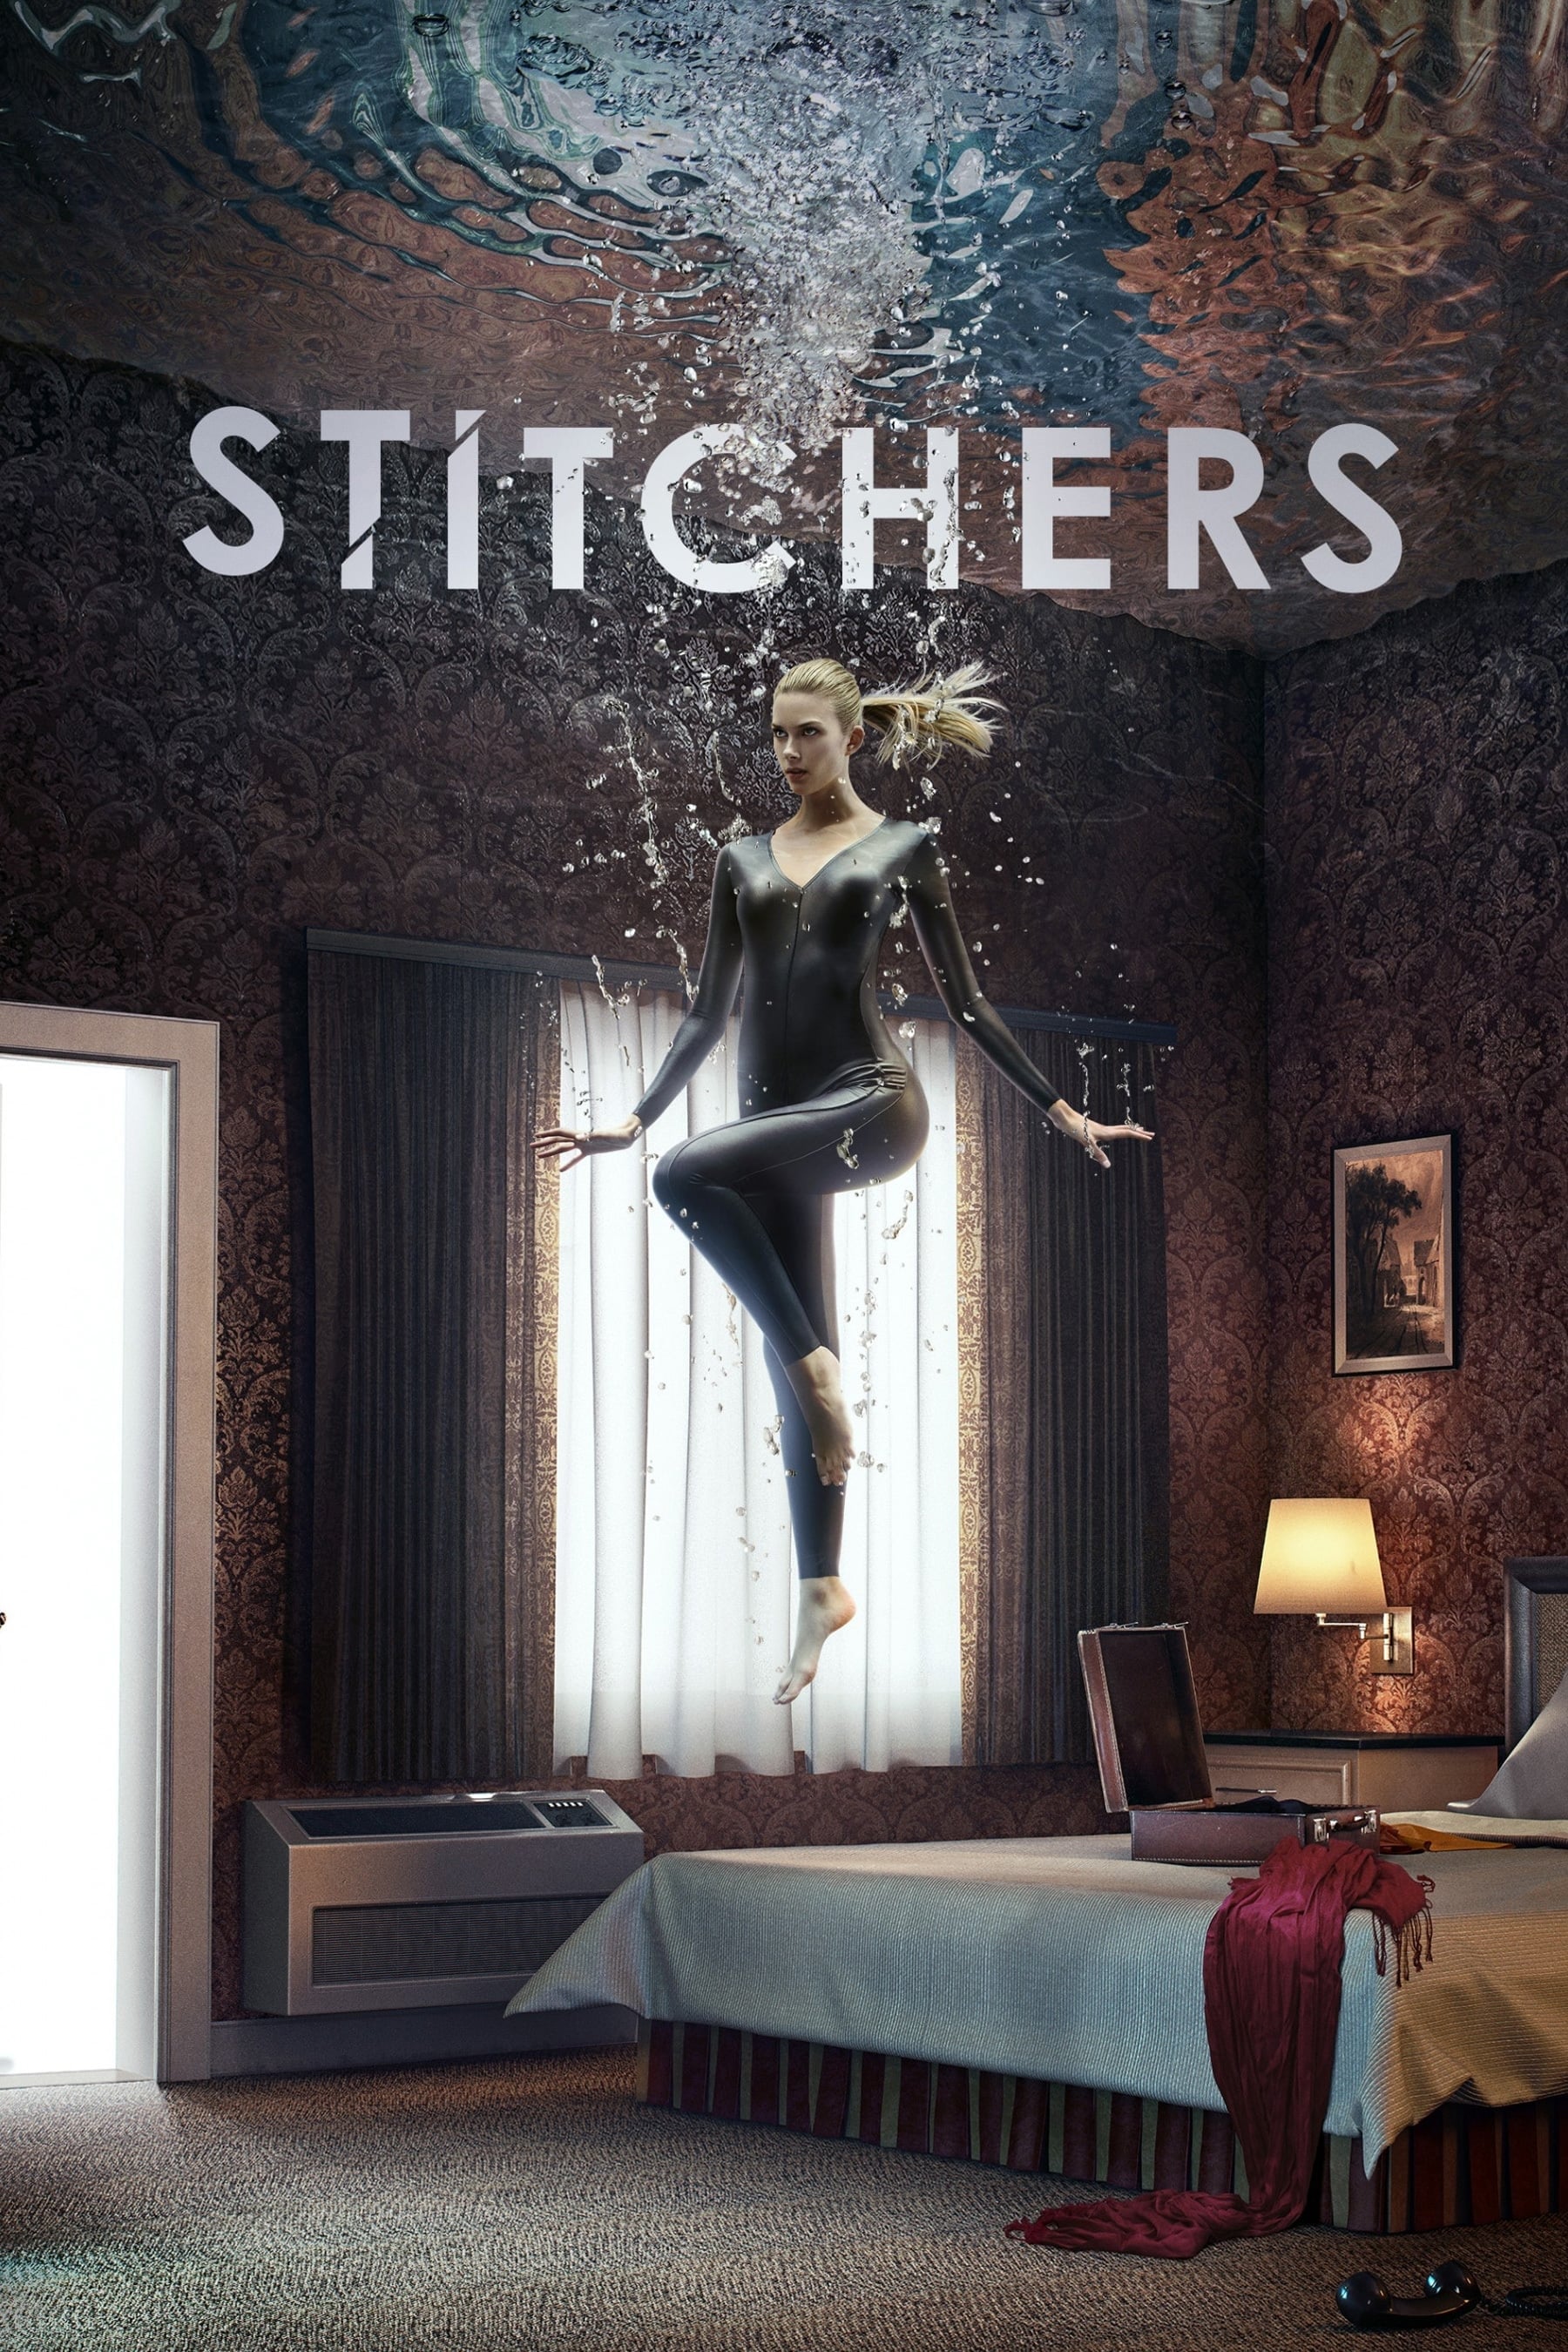 Stitchers TV Shows About Government